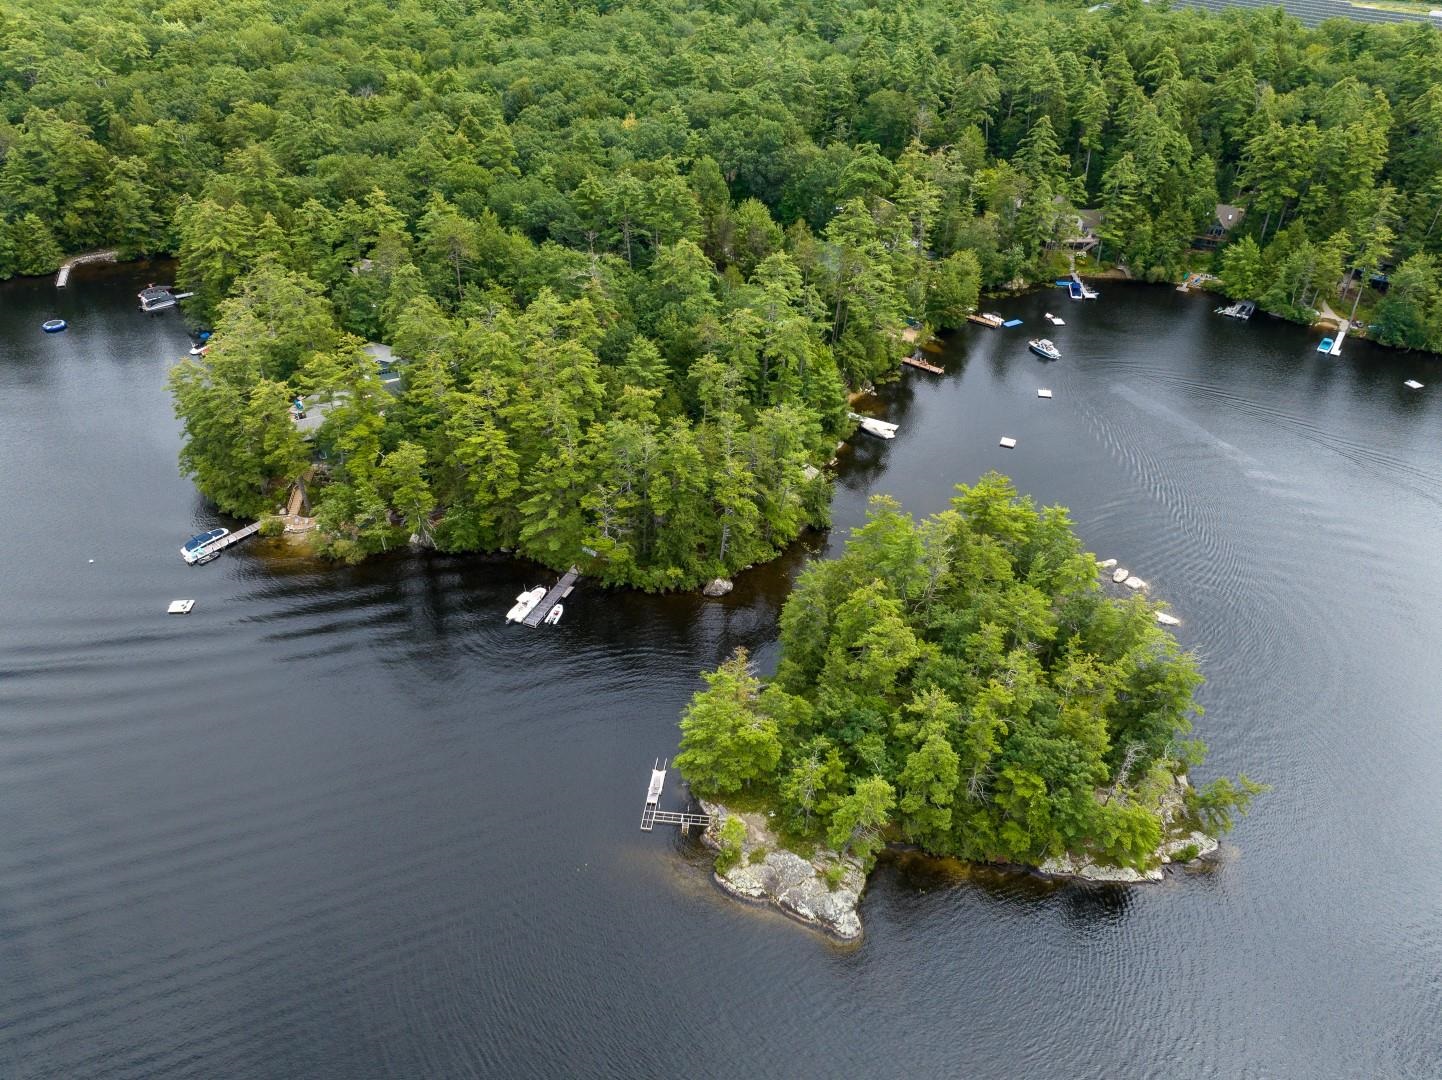 MLS 4992187: Starr Island and First Point Road, Moultonborough NH